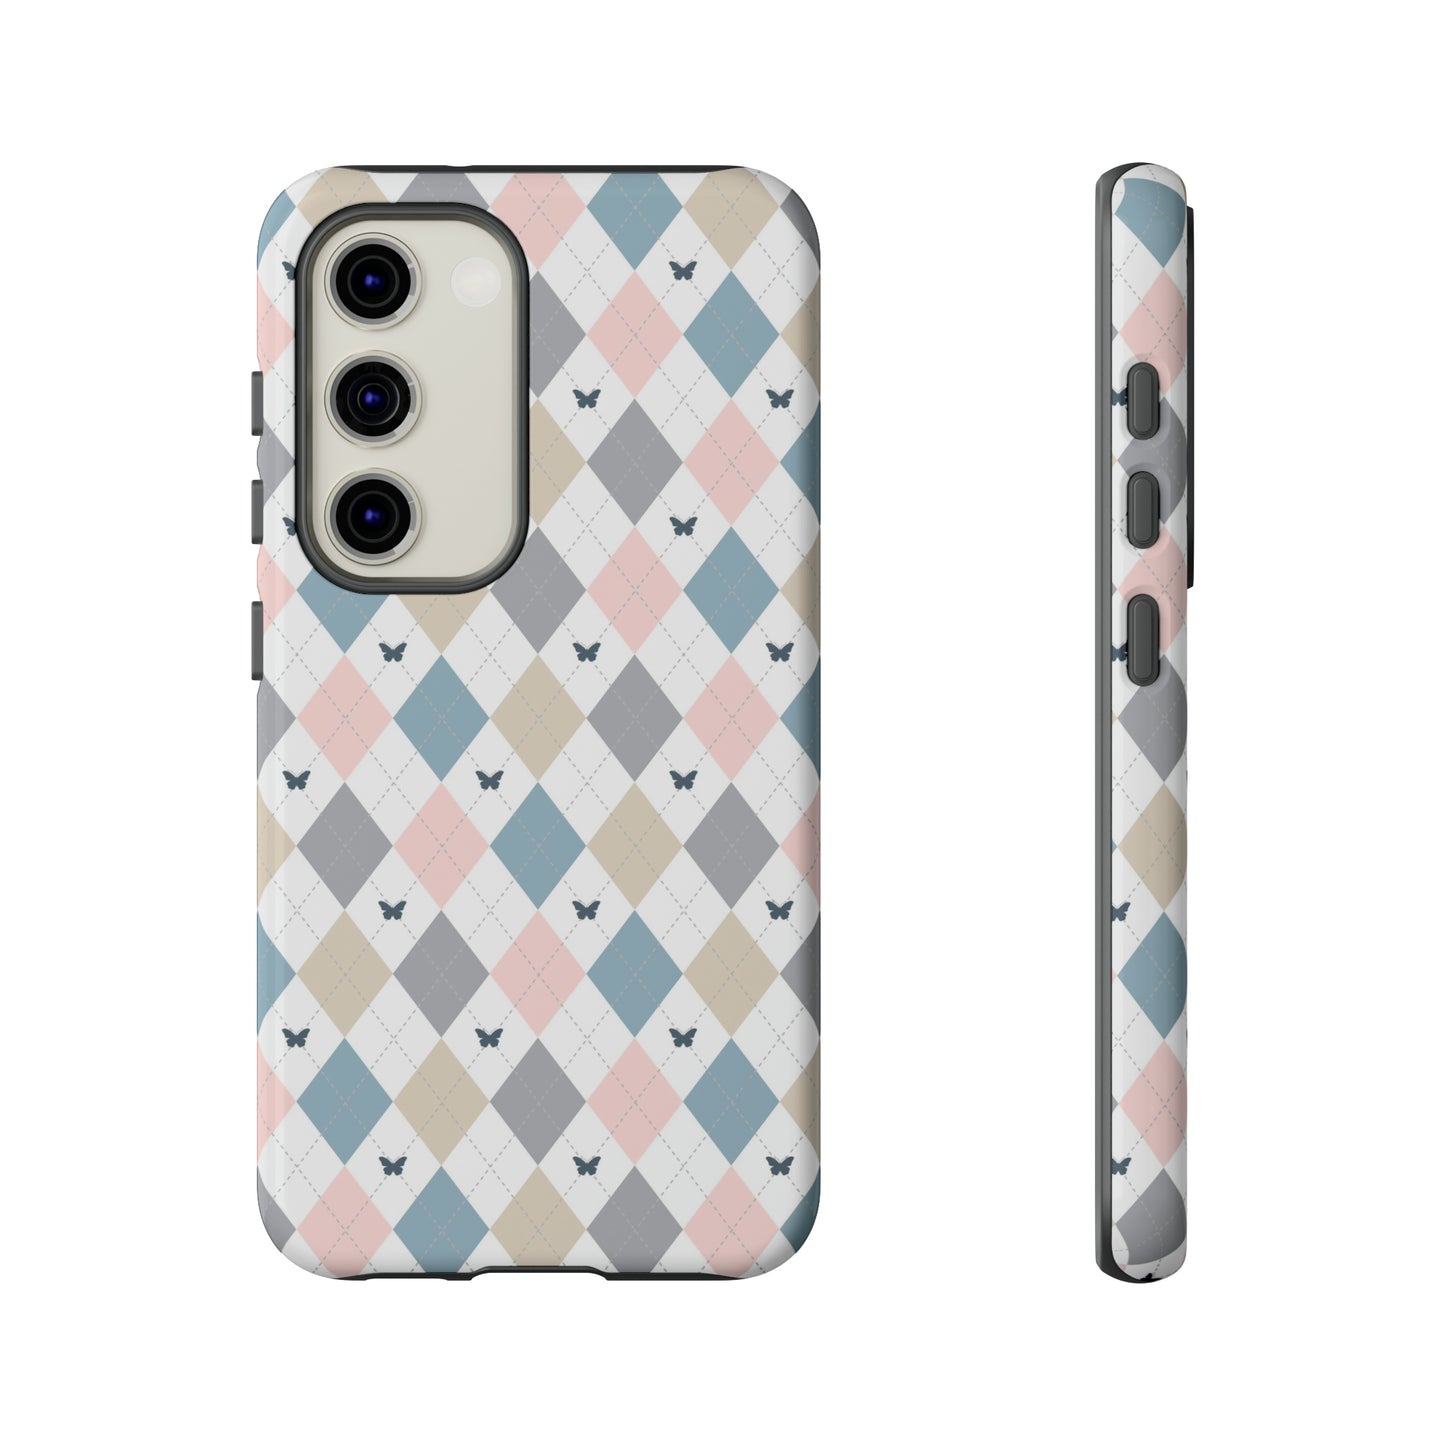 Argyle Pastel Plaid and Butterflies print design Tough Phone Case compatible with a large variety of Samsung models